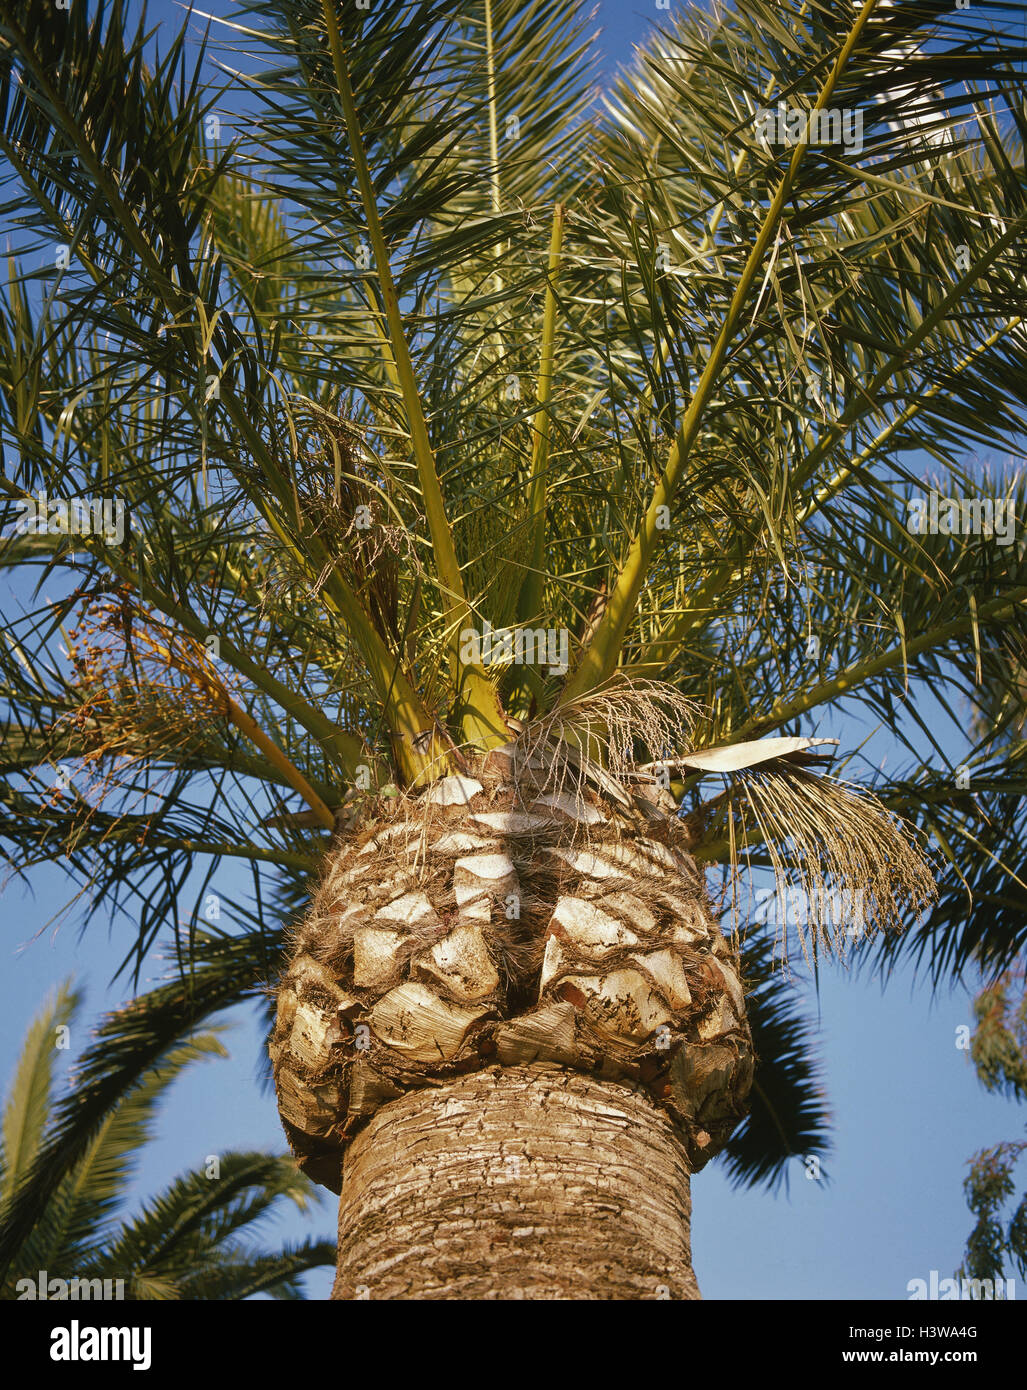 Canary date palm, phoenix canariensis, close up, nature, botany, plant, palm, date palm, detail, Fiederpalme, Arecaceae, Palmae, wooden plants, einkeimblättrig, from below, Stock Photo